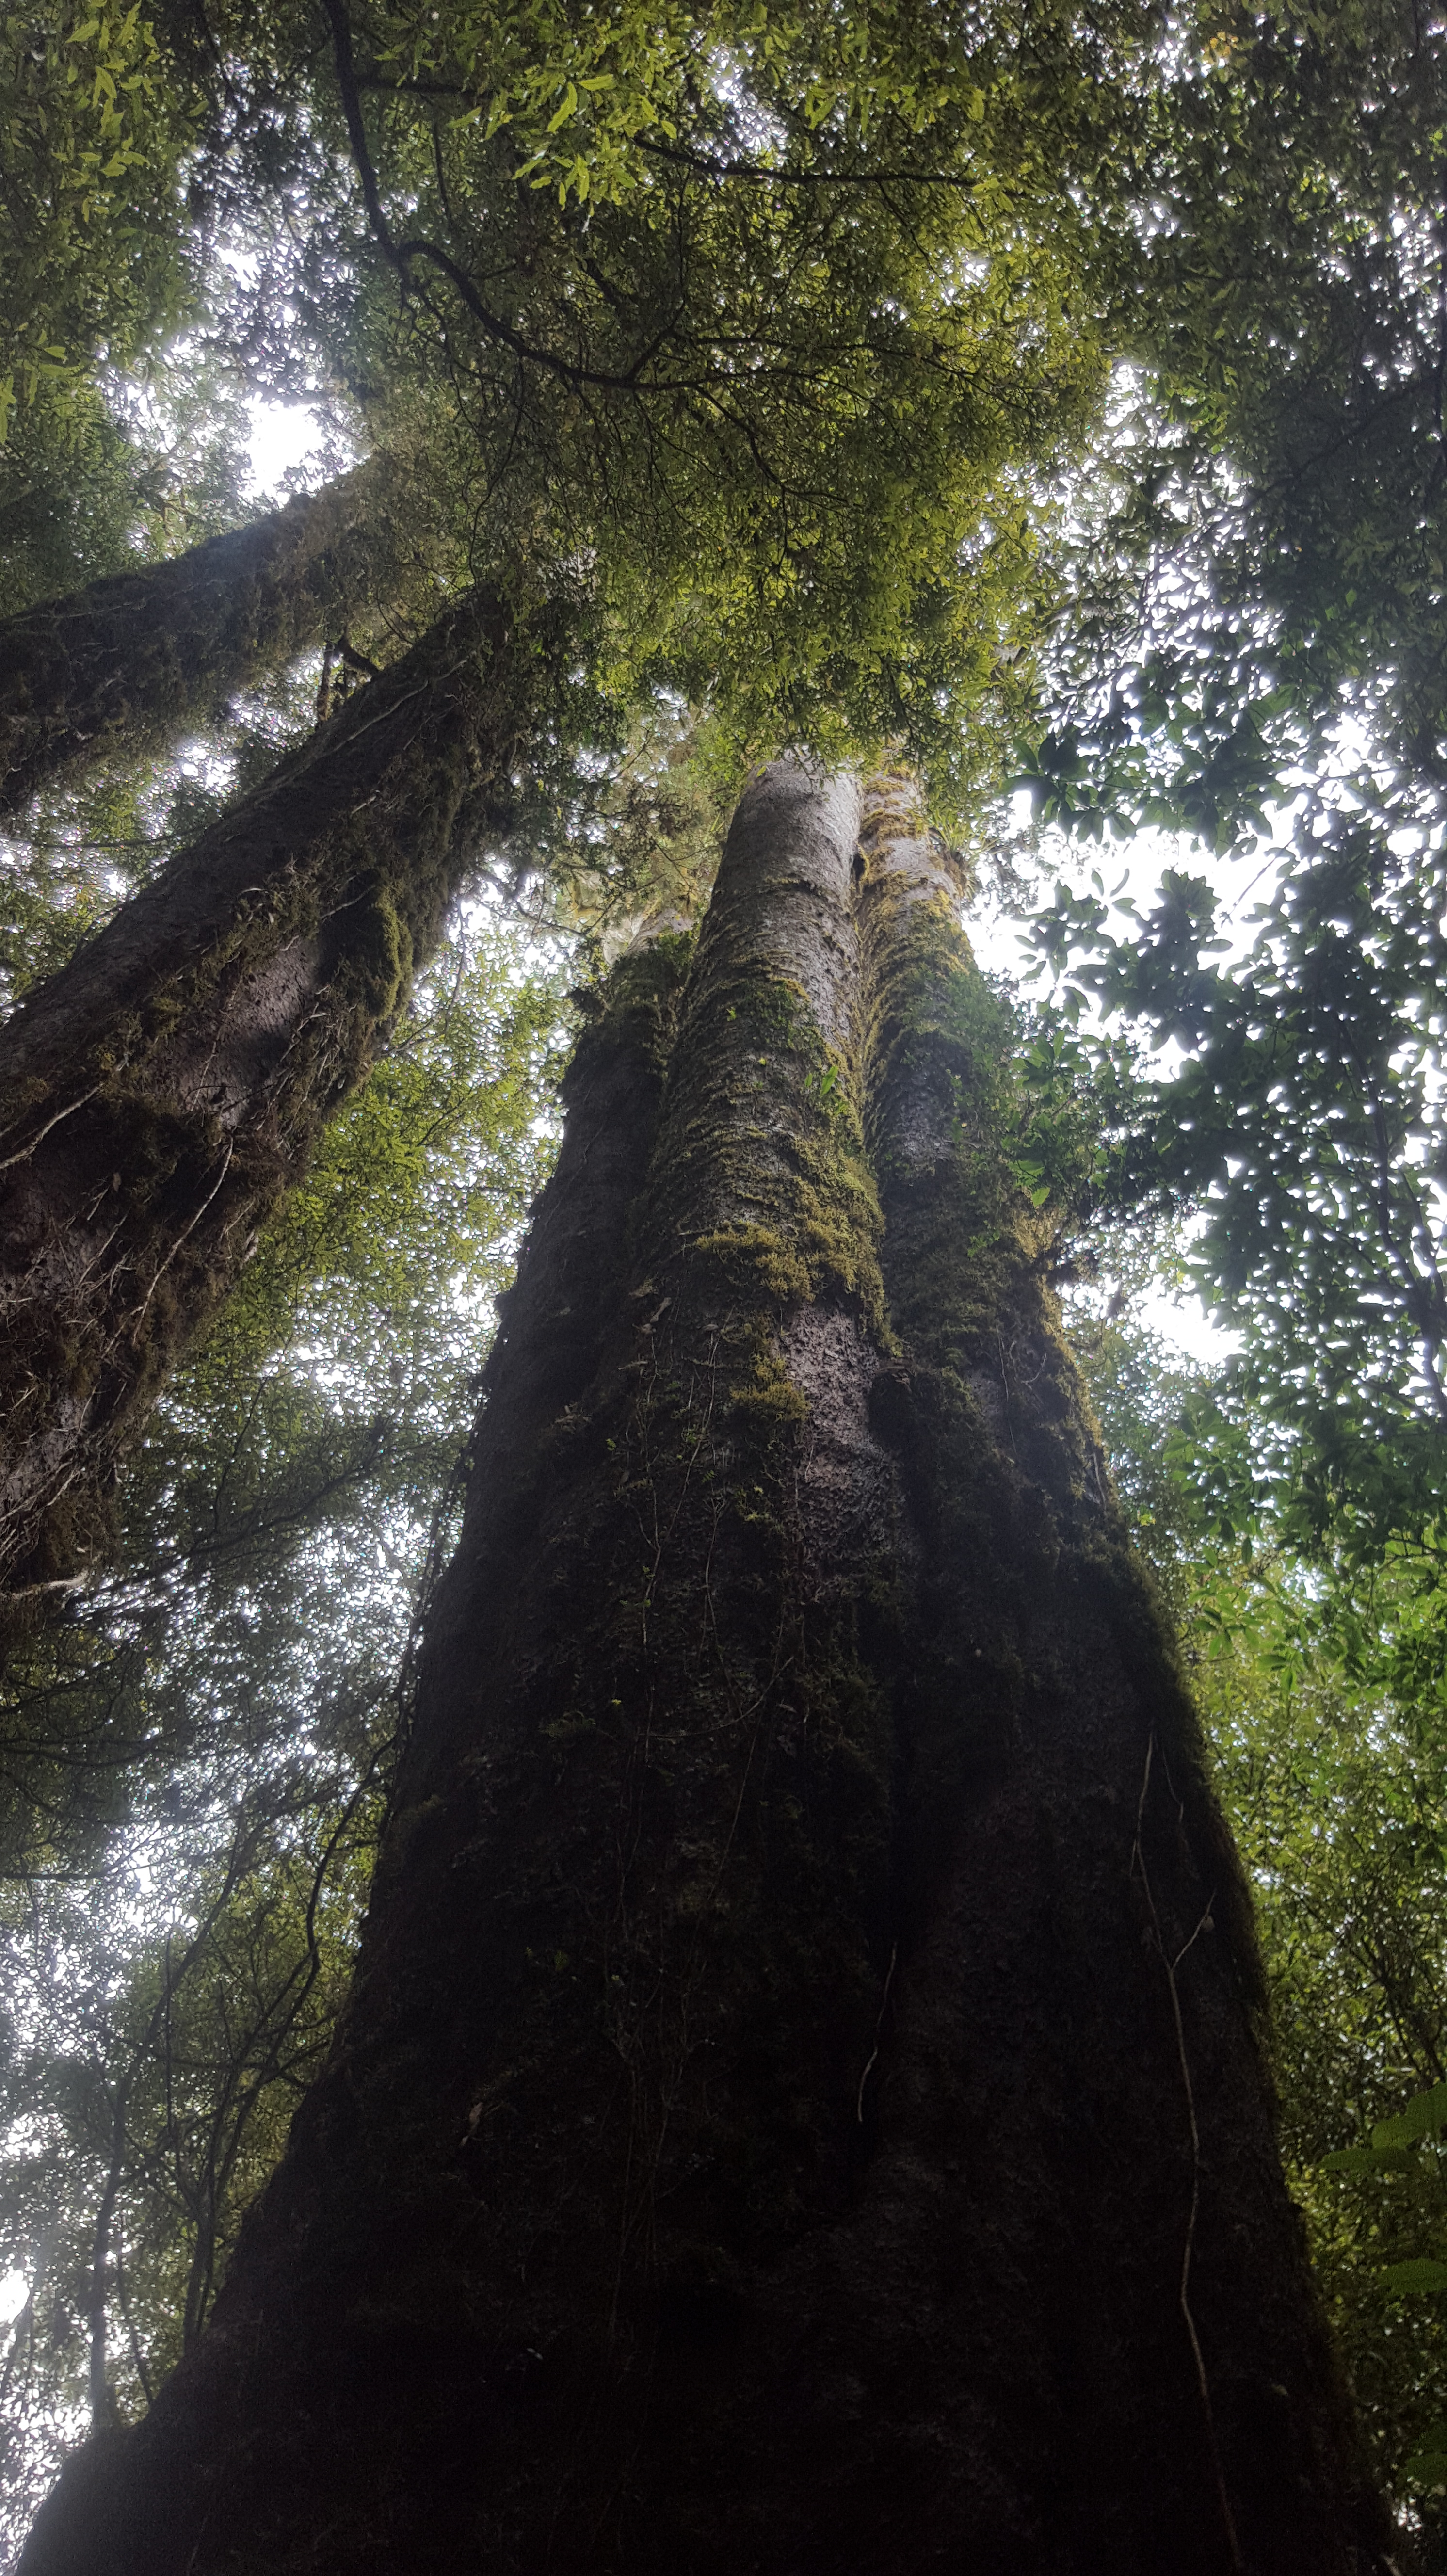 Looking up to the sky from the base of a large kauri tree which splits into 3 separate trees.